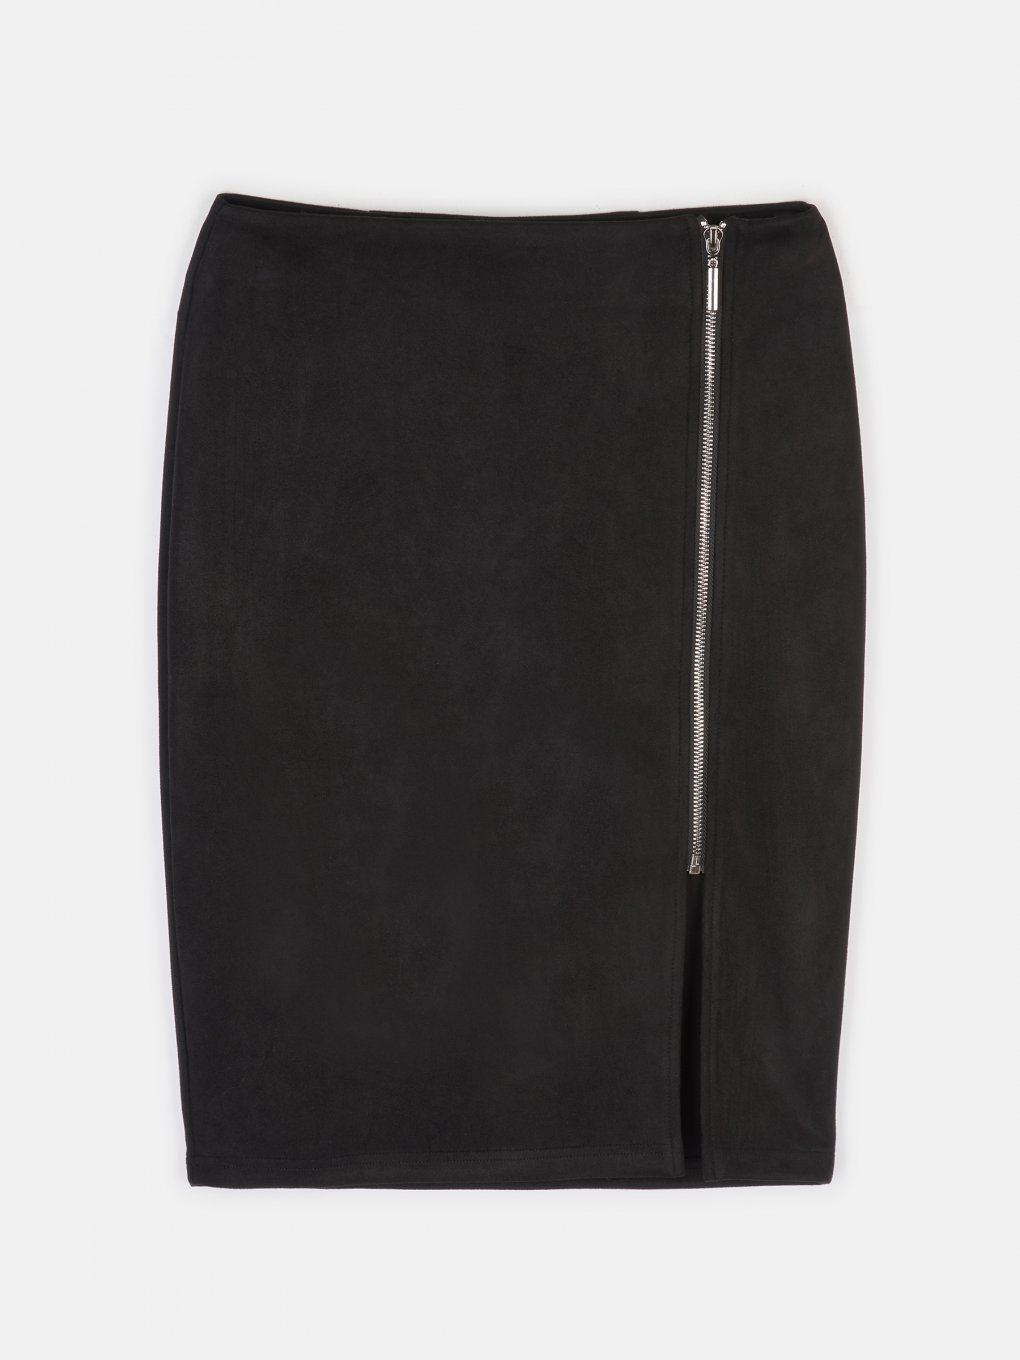 Bodycon skirt with front zipper